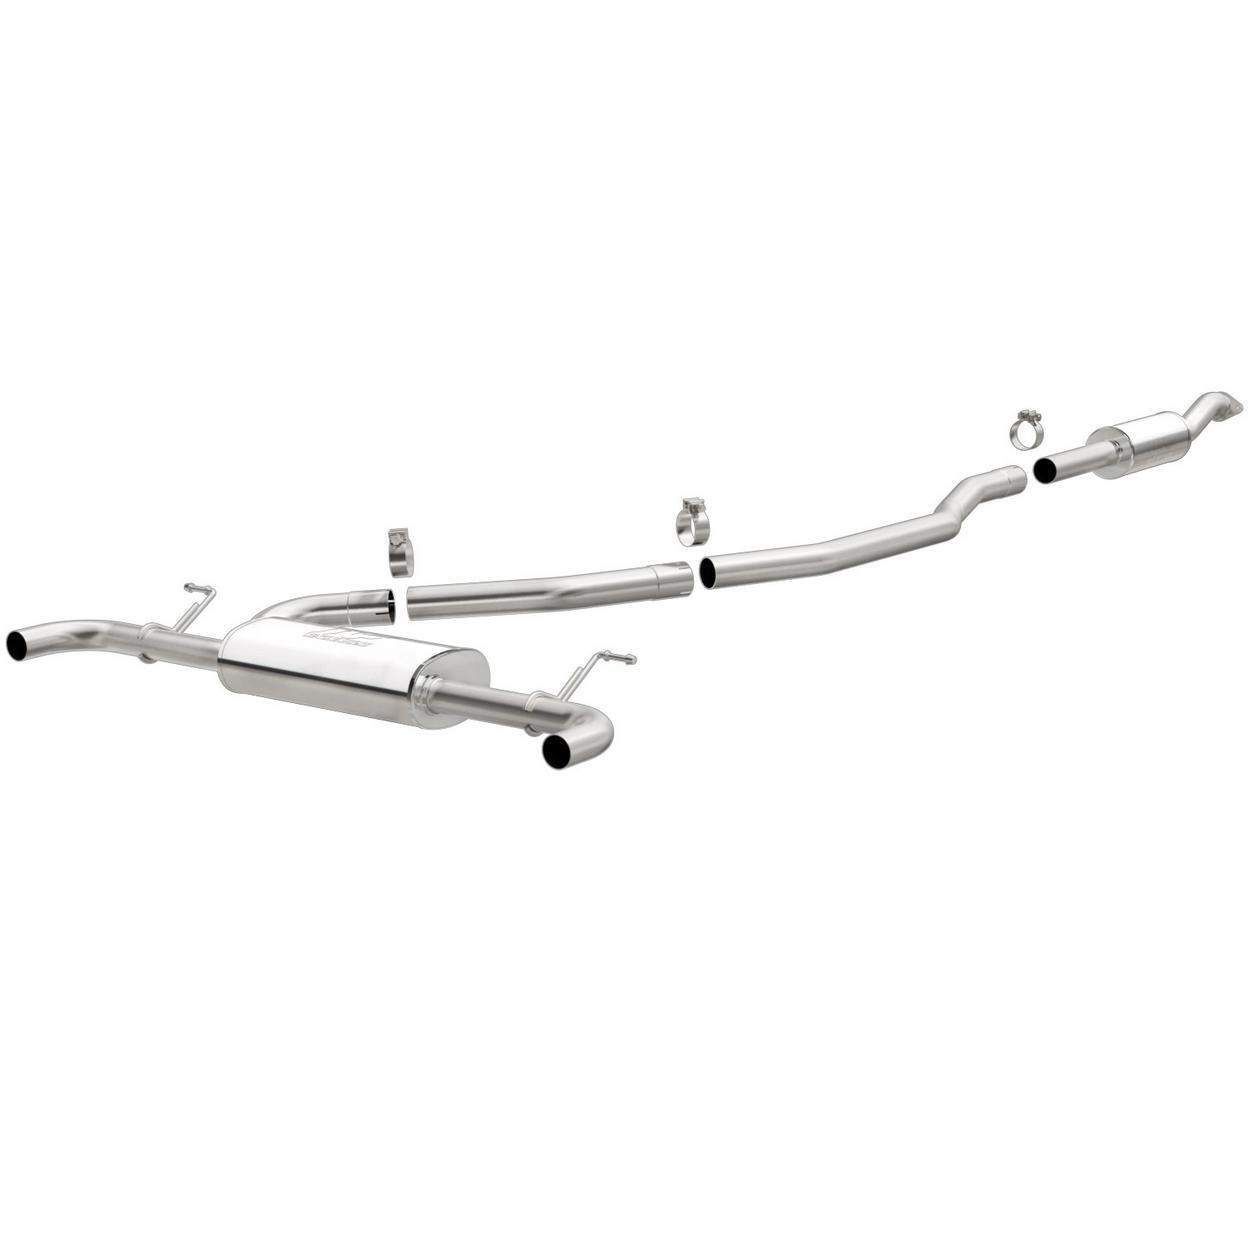 MagnaFlow 15230-AO Exhaust System Kit for 2013-2016 Lincoln MKZ